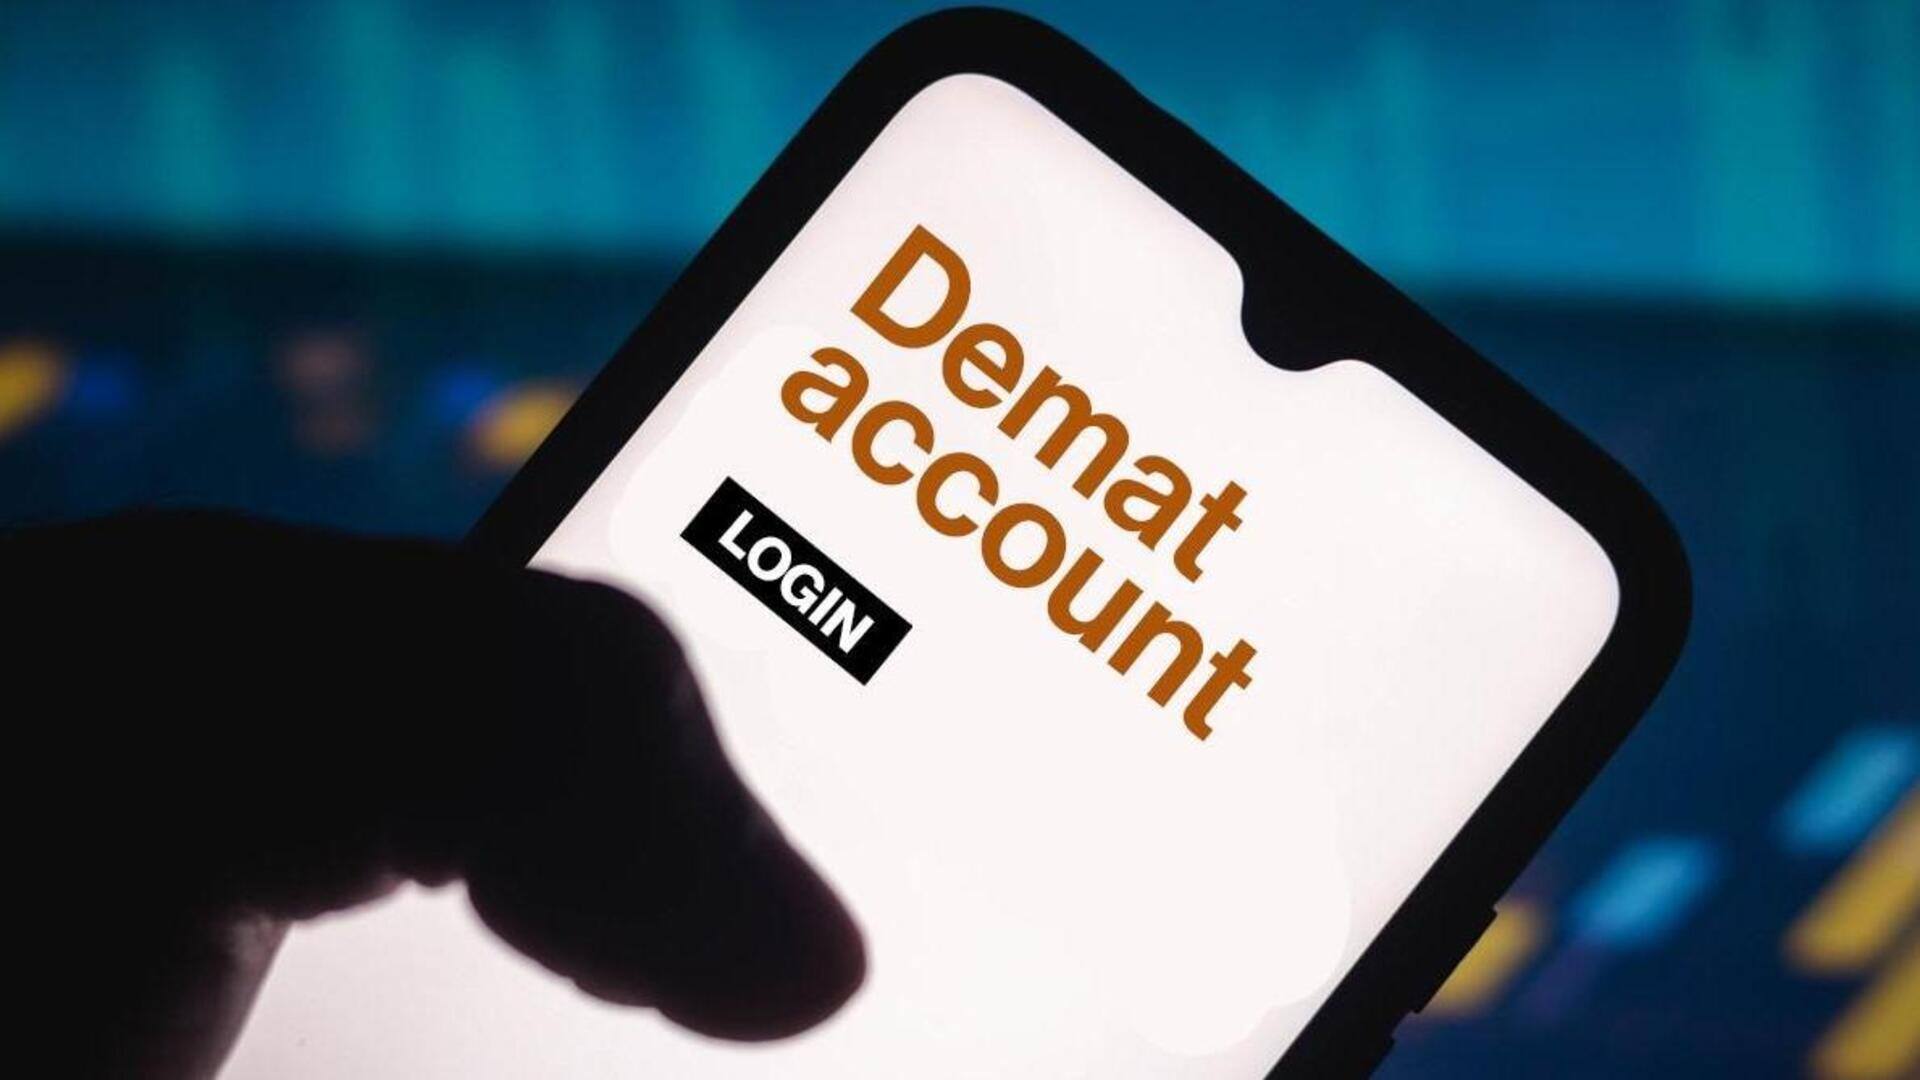 Demat accounts surge by 26% YoY to 12.97cr in September